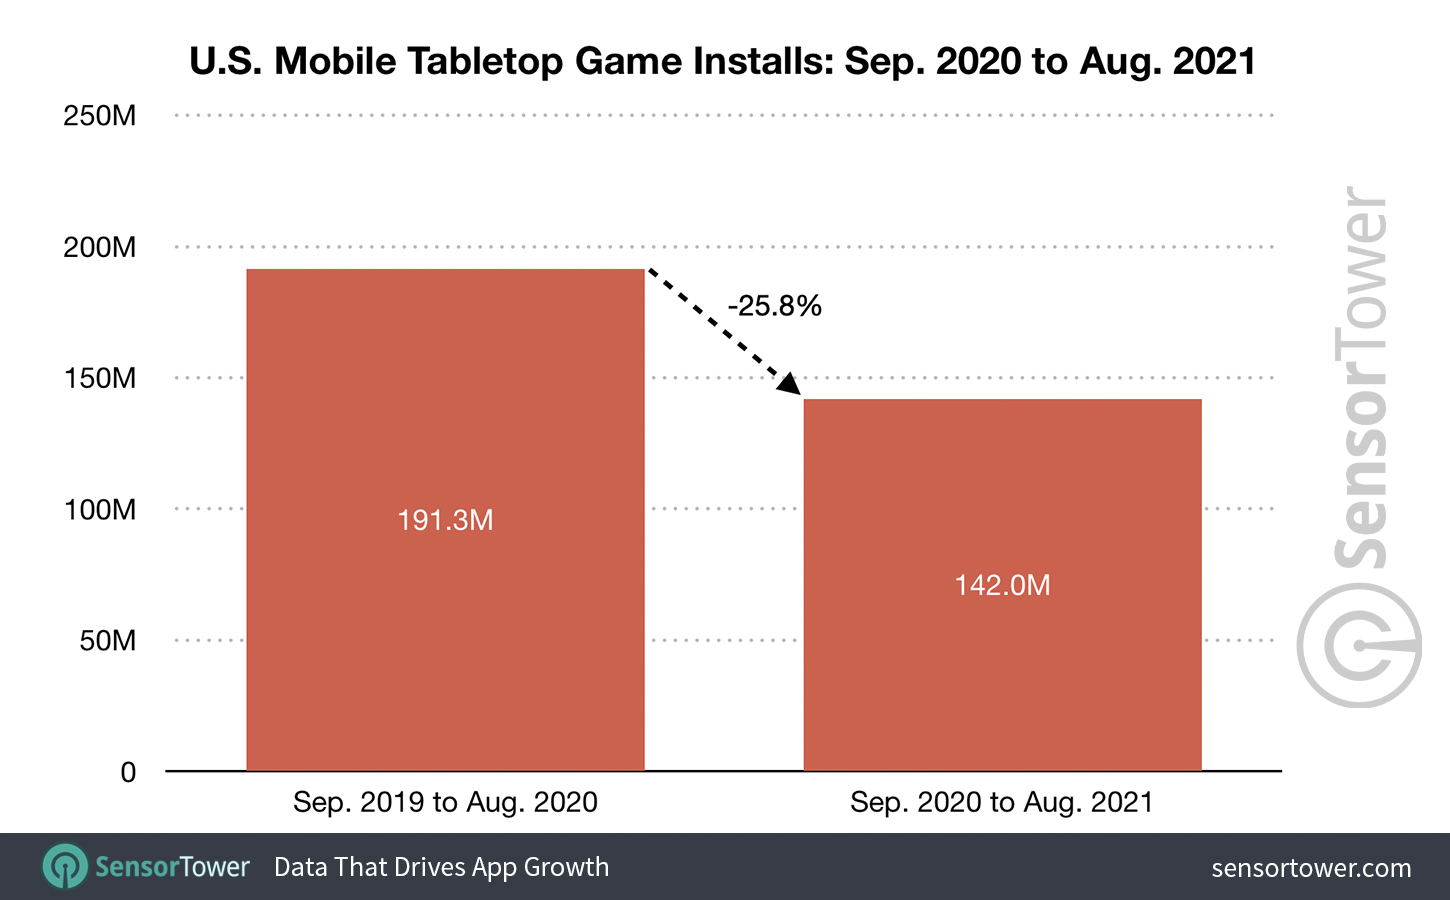 U.S. Mobile Casino Game Spending Downloads: September 1, 2020 to August 31, 2021